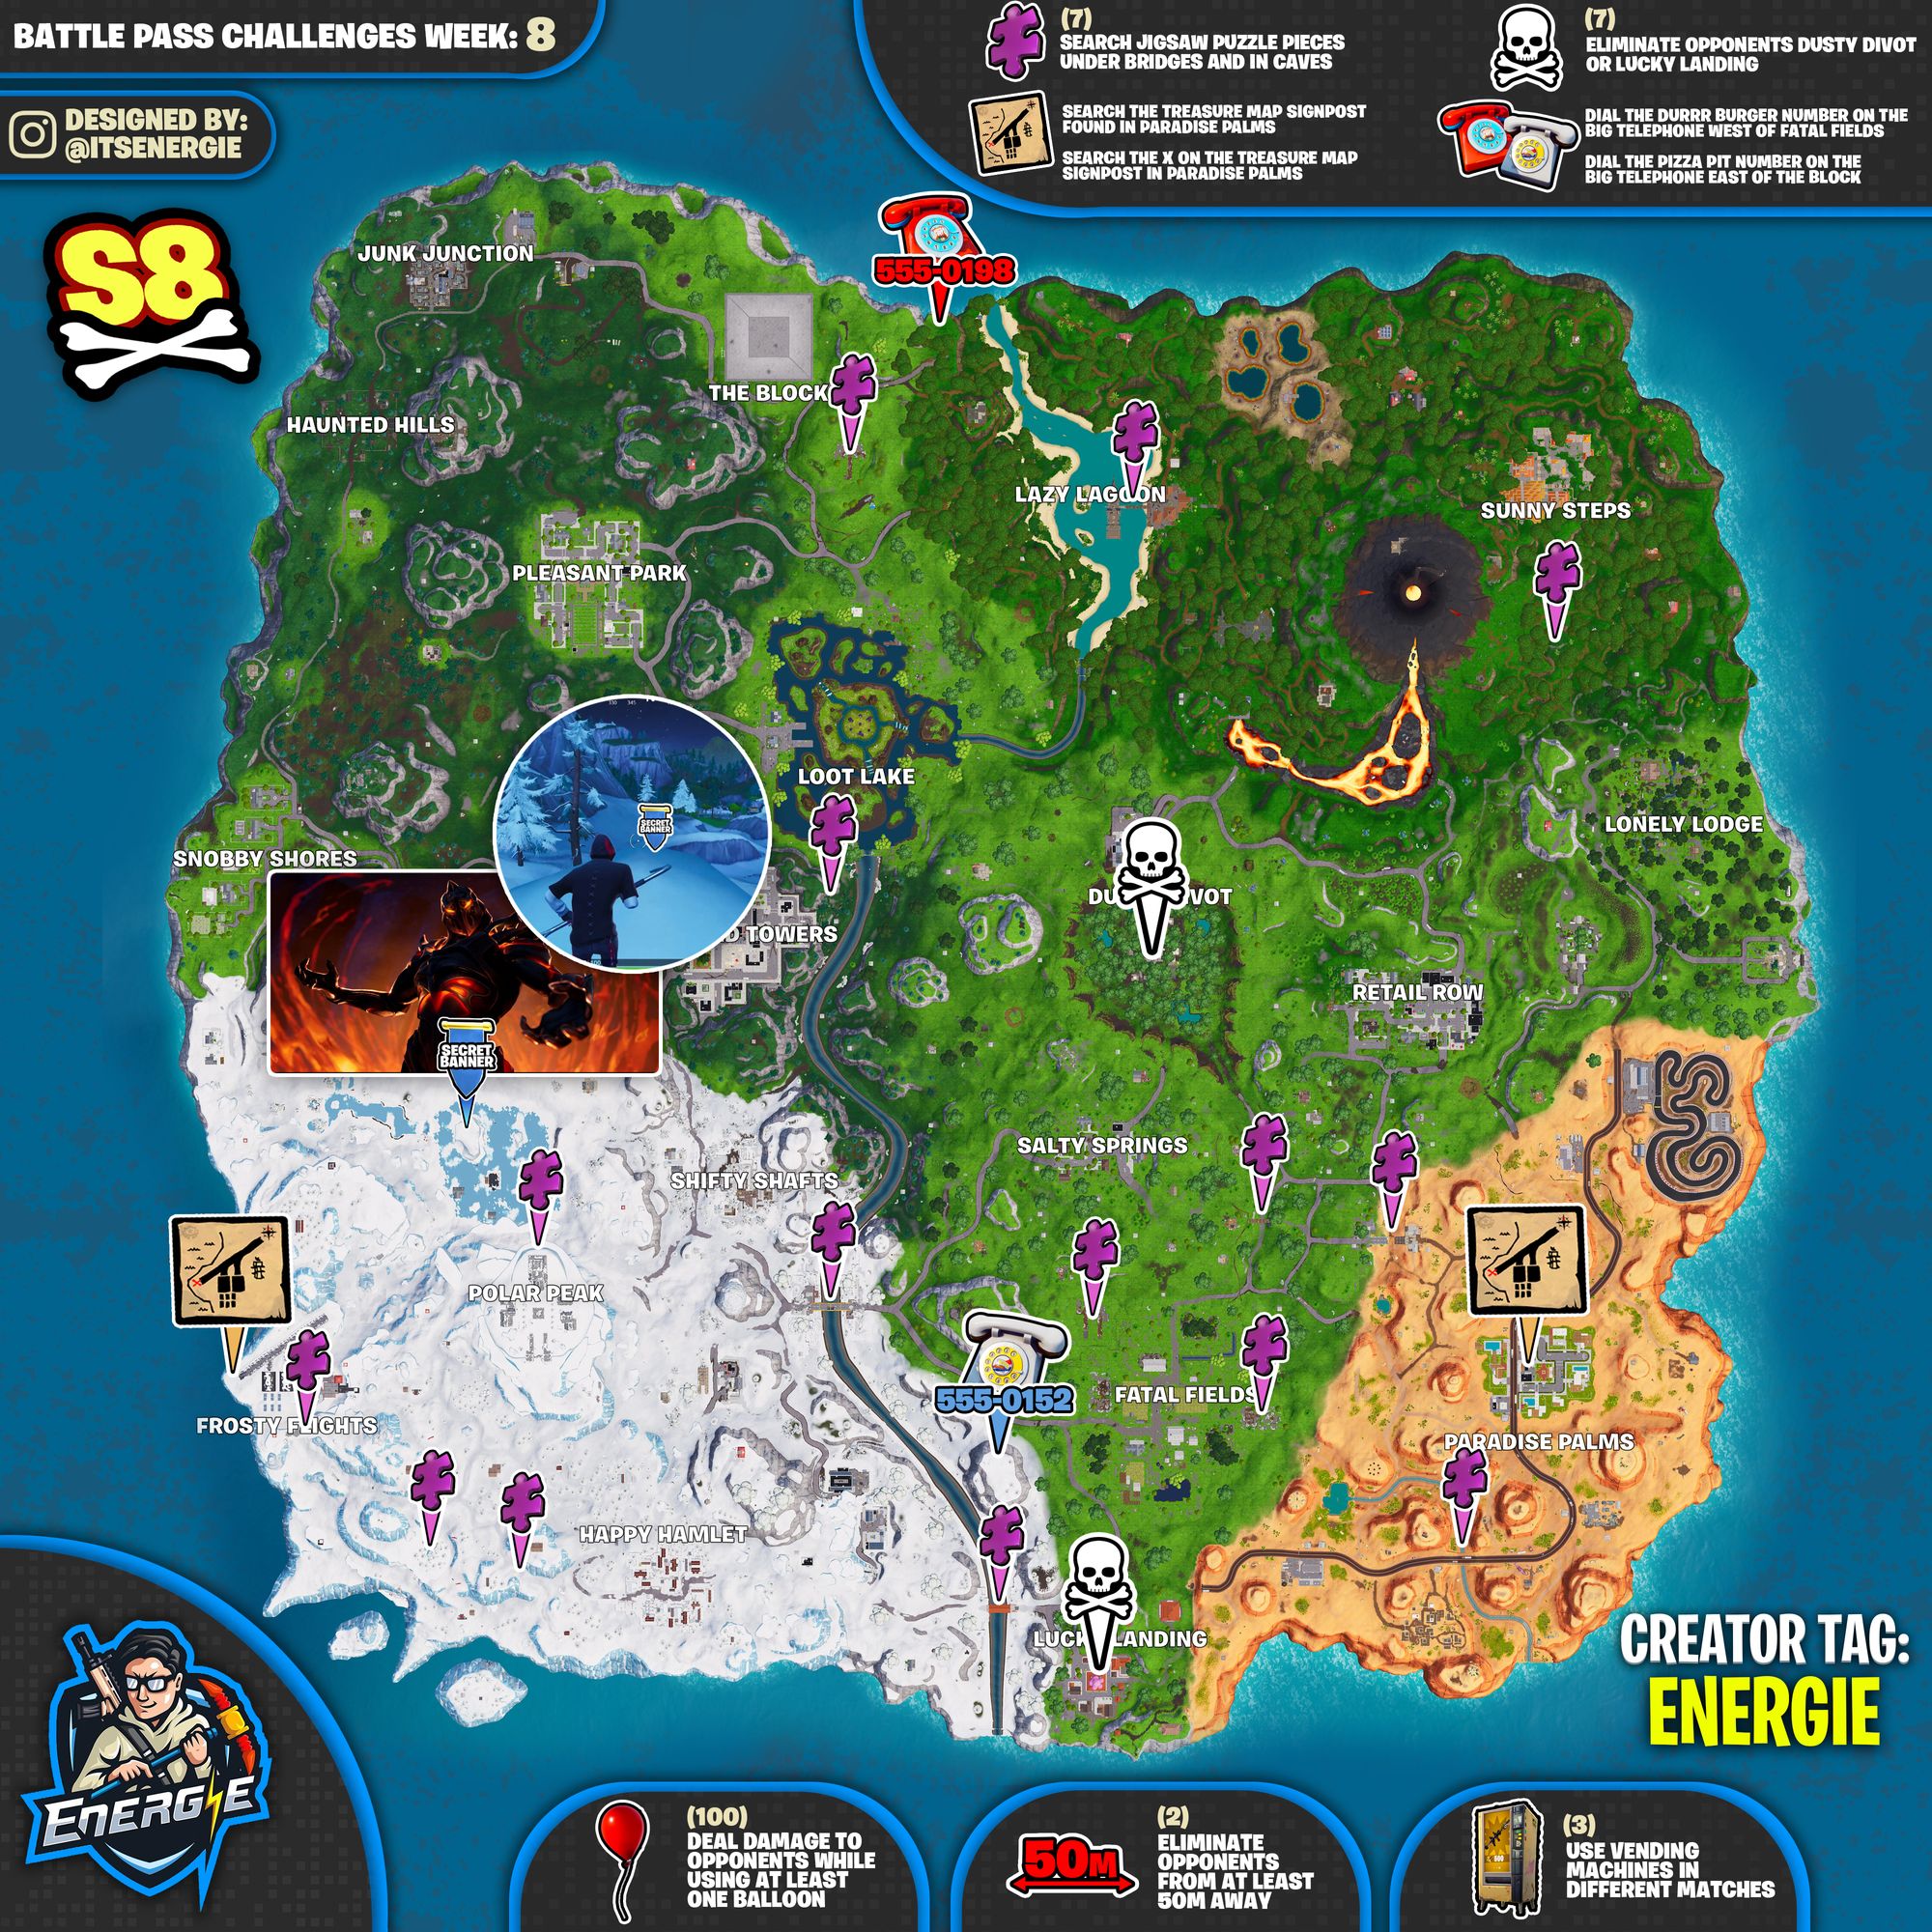 if you need any assistance with week 8 s challenges itsenergie has provided one of his cheat sheets to help out - fortnite week 8 search jigsaw puzzle pieces under bridges and in caves